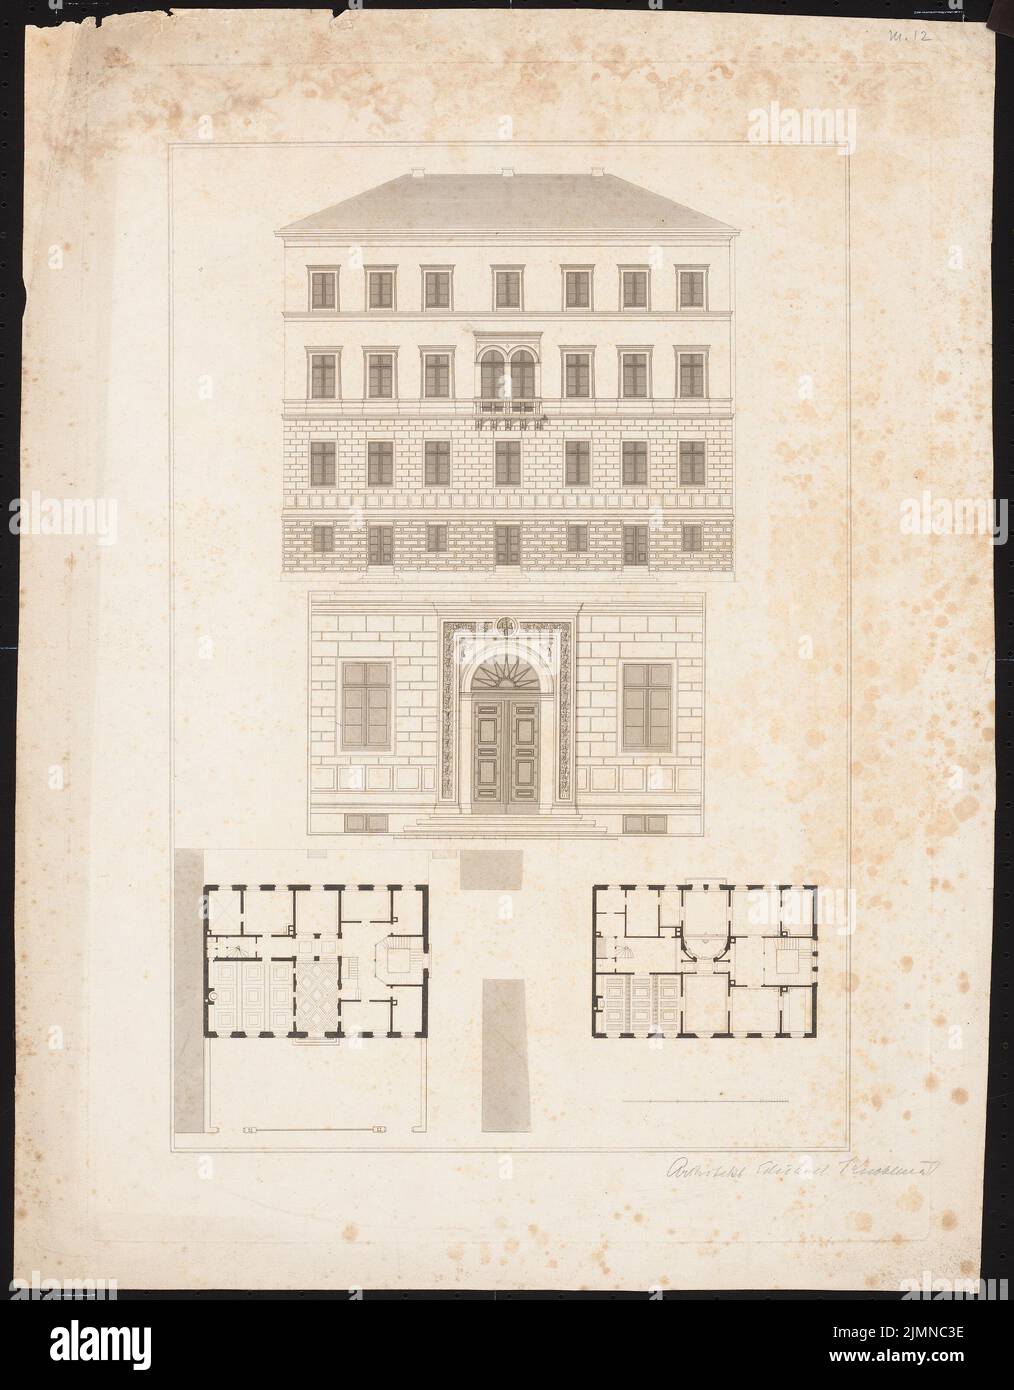 Knoblauch Eduard (1801-1865), four-storey urban residential building with a seven-axle road front (before 1848): front view, floor plan ground and upper floor. Print, 60.3 x 47.1 cm (including scan edges) Stock Photo